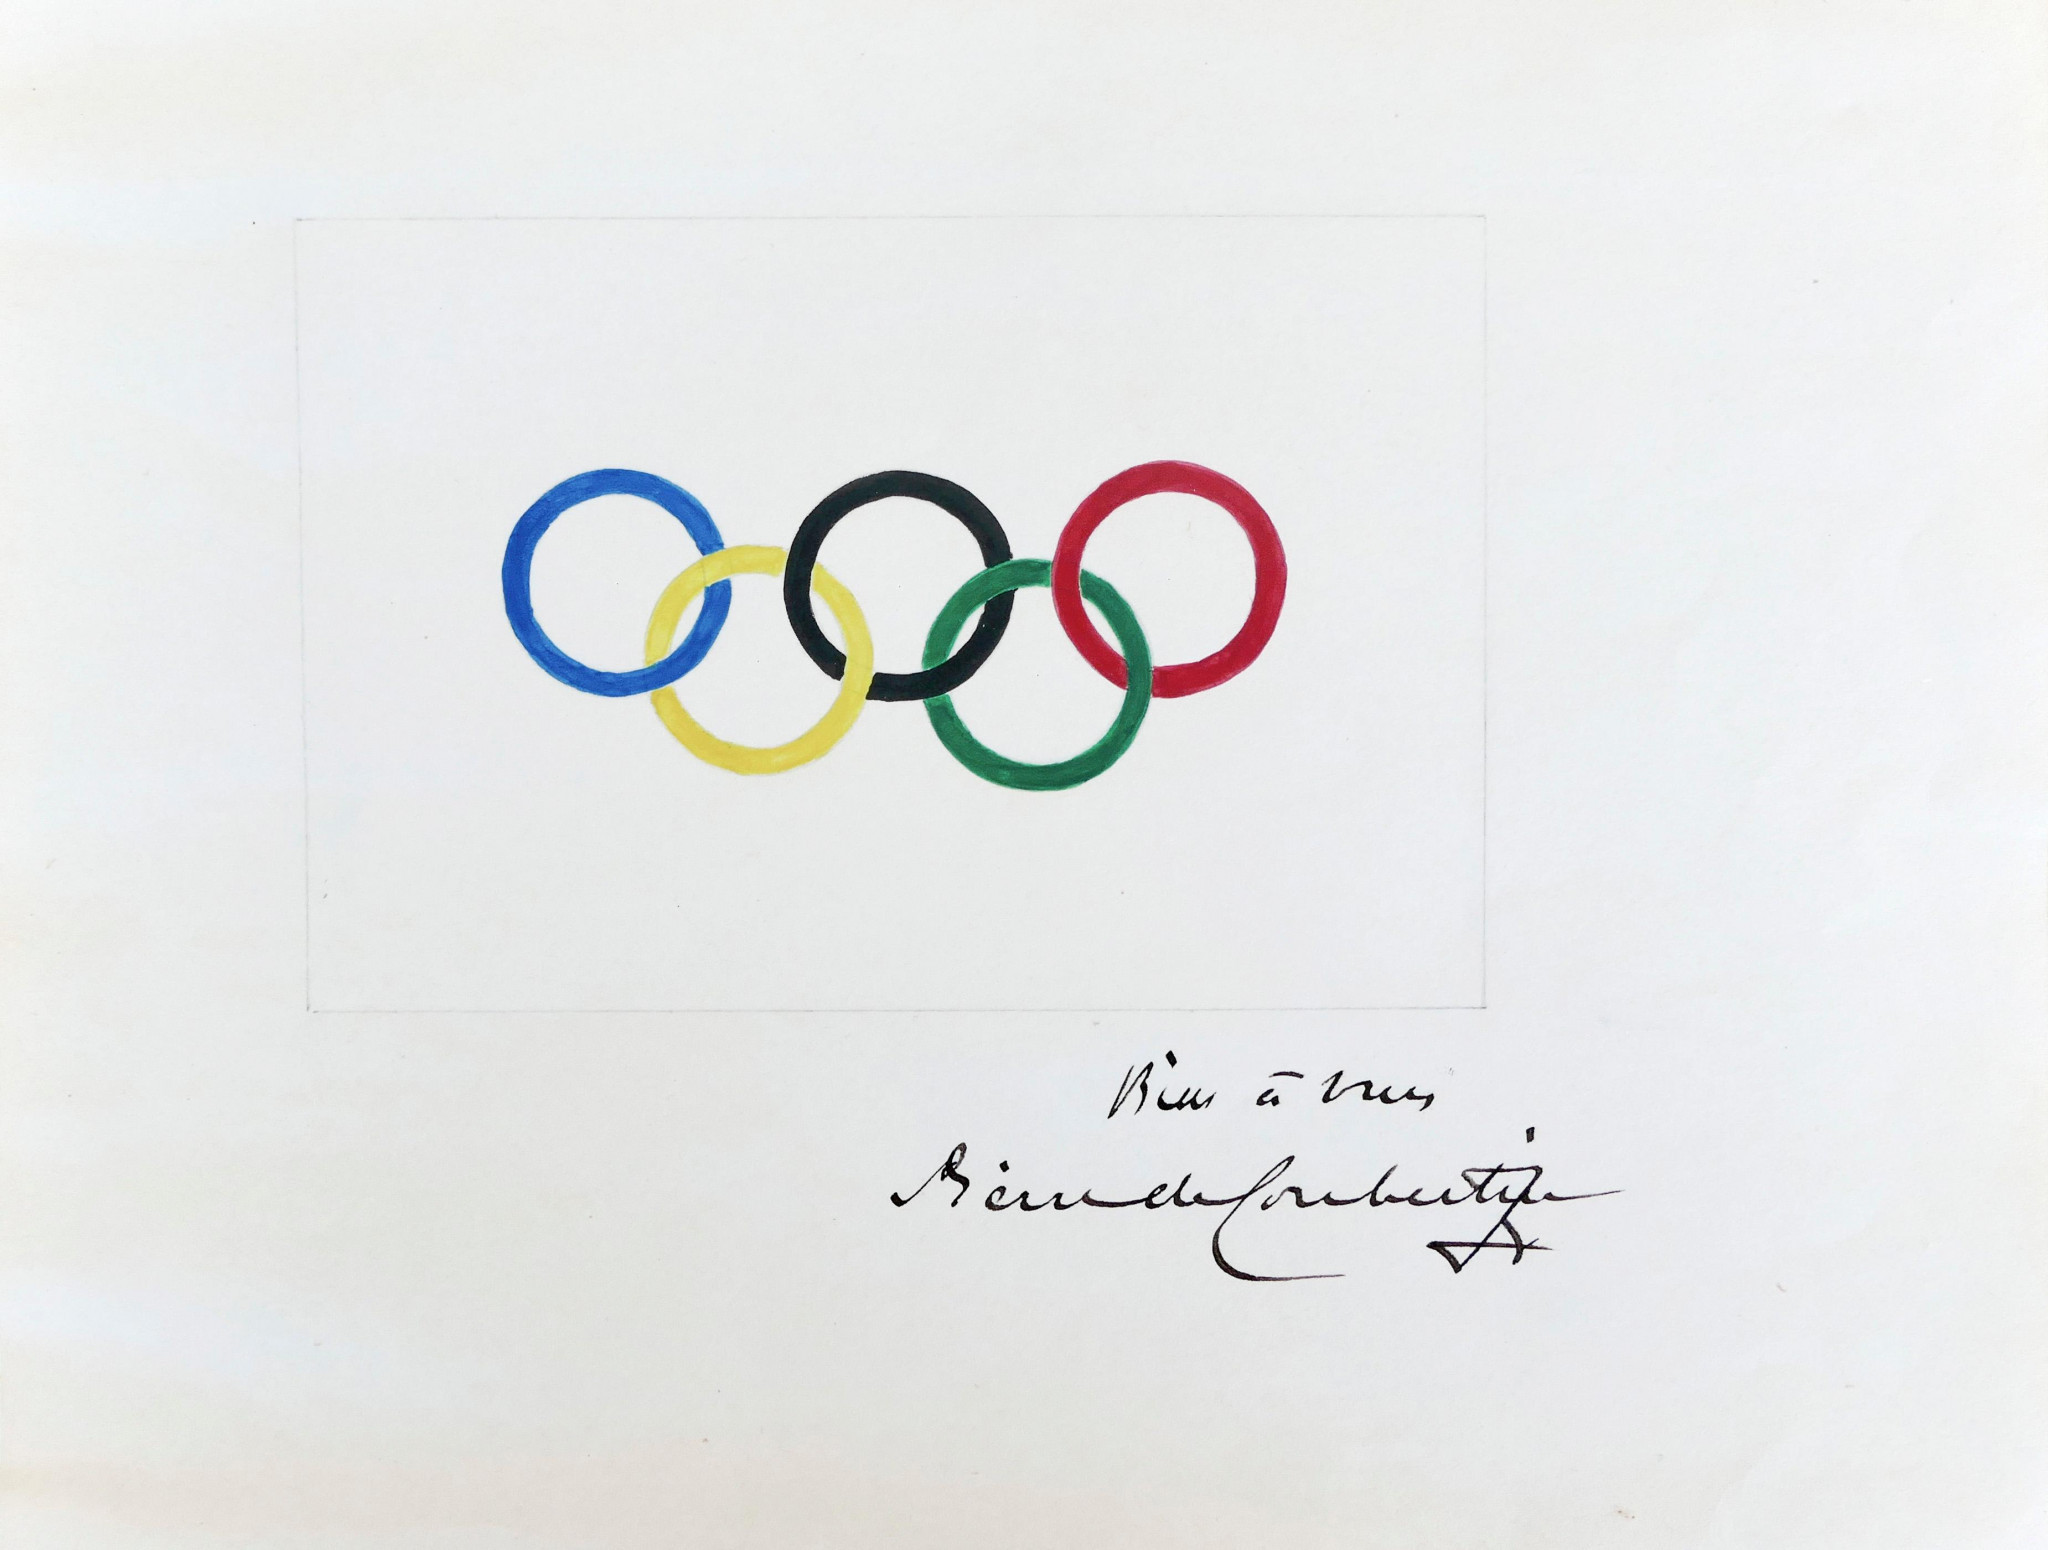 An original drawing of the Olympic rings by Baron Pierre de Coubertin has been sold for €185,000 at an auction in Cannes ©Cannes Auction House